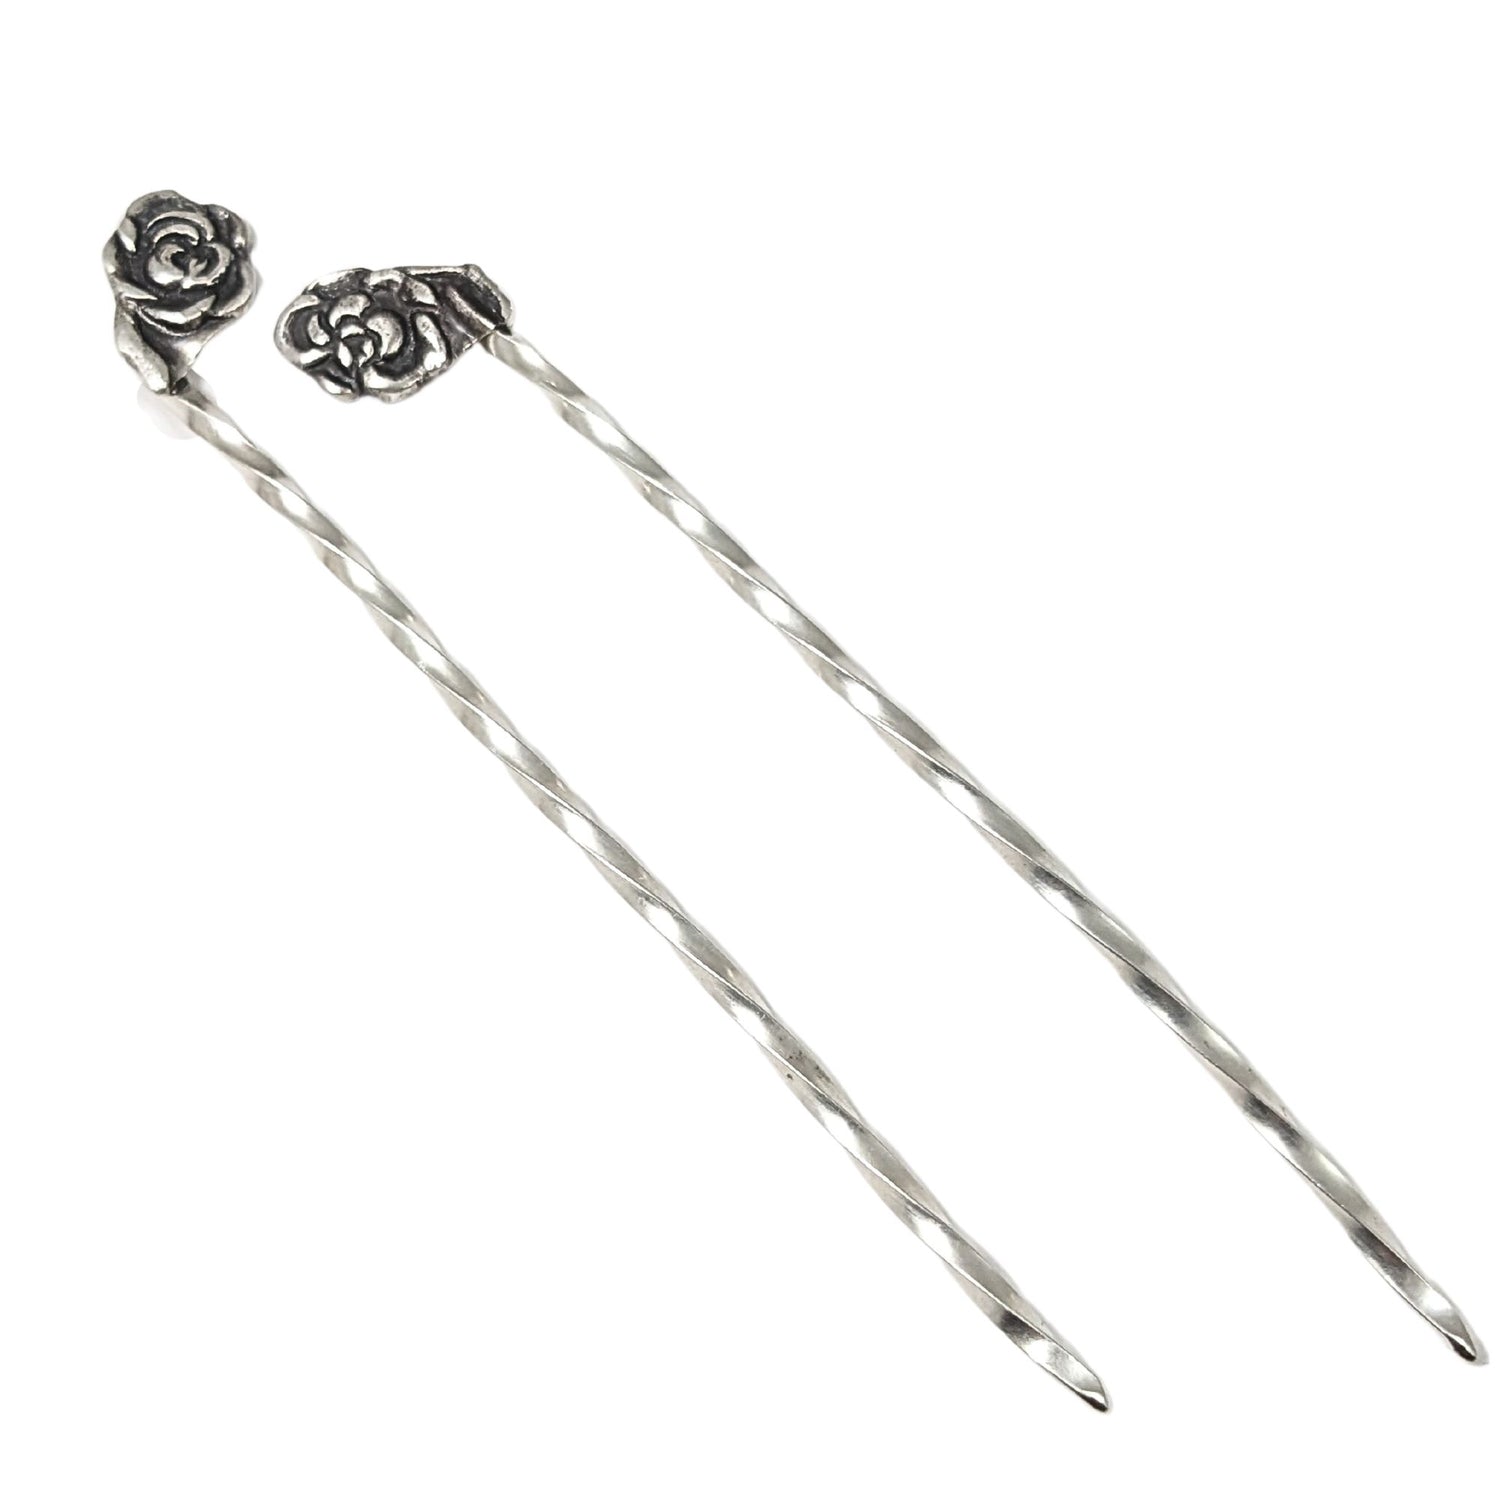 Pair of sterling silver cocktail picks, each with a rose on top.